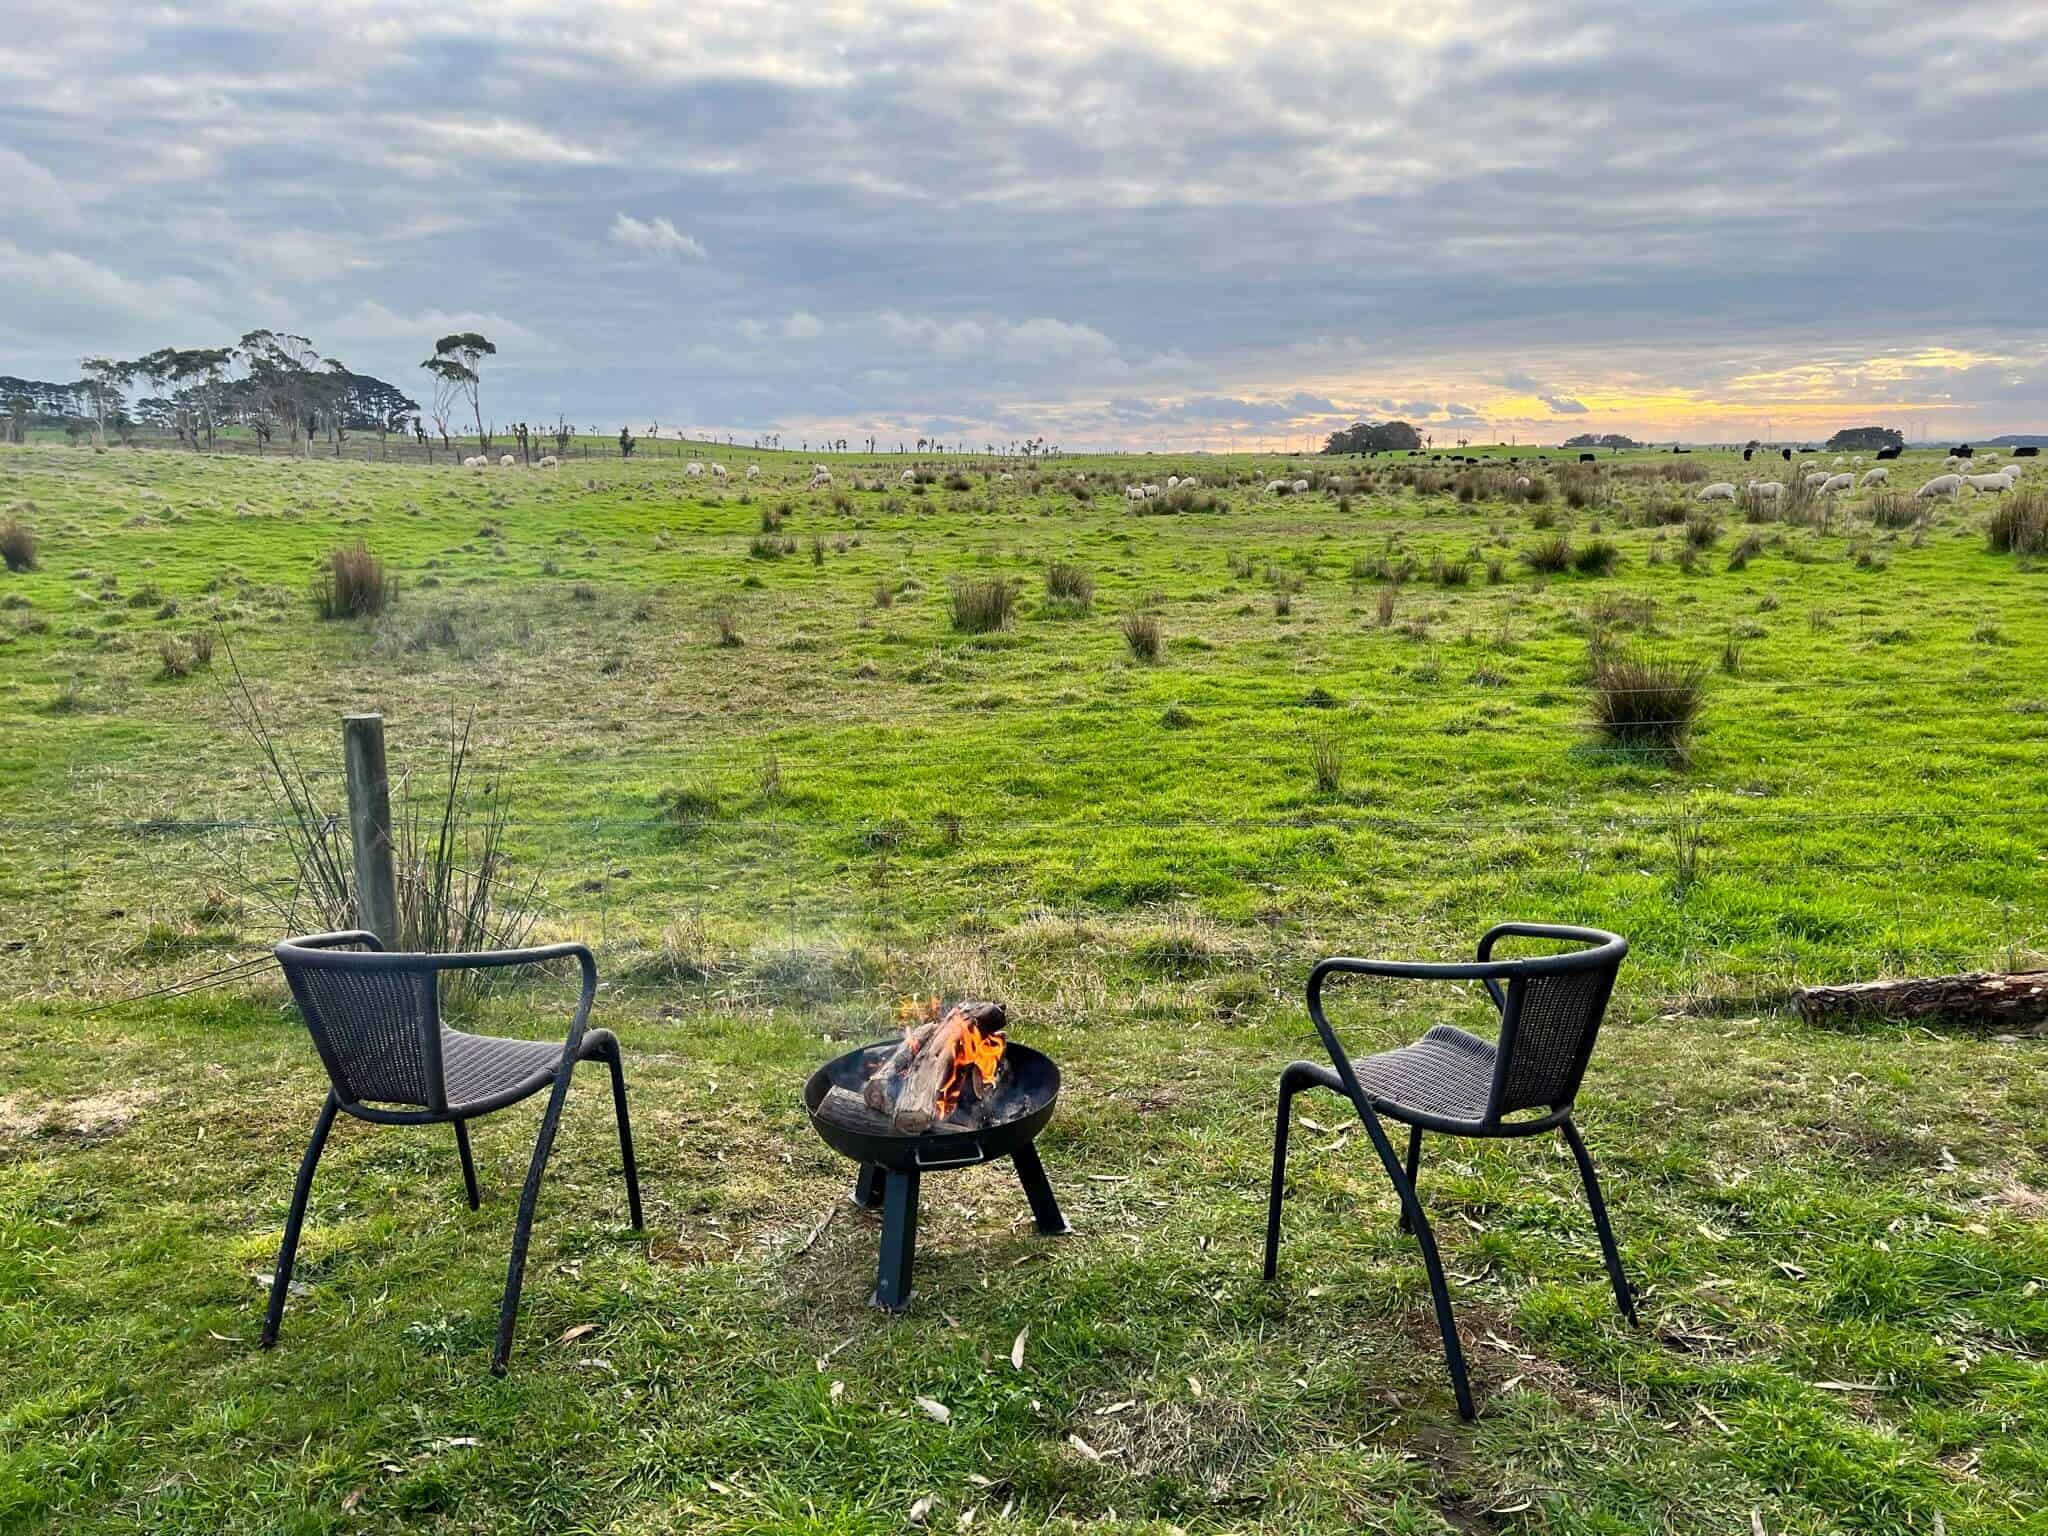 Firepit overlooking the farmland